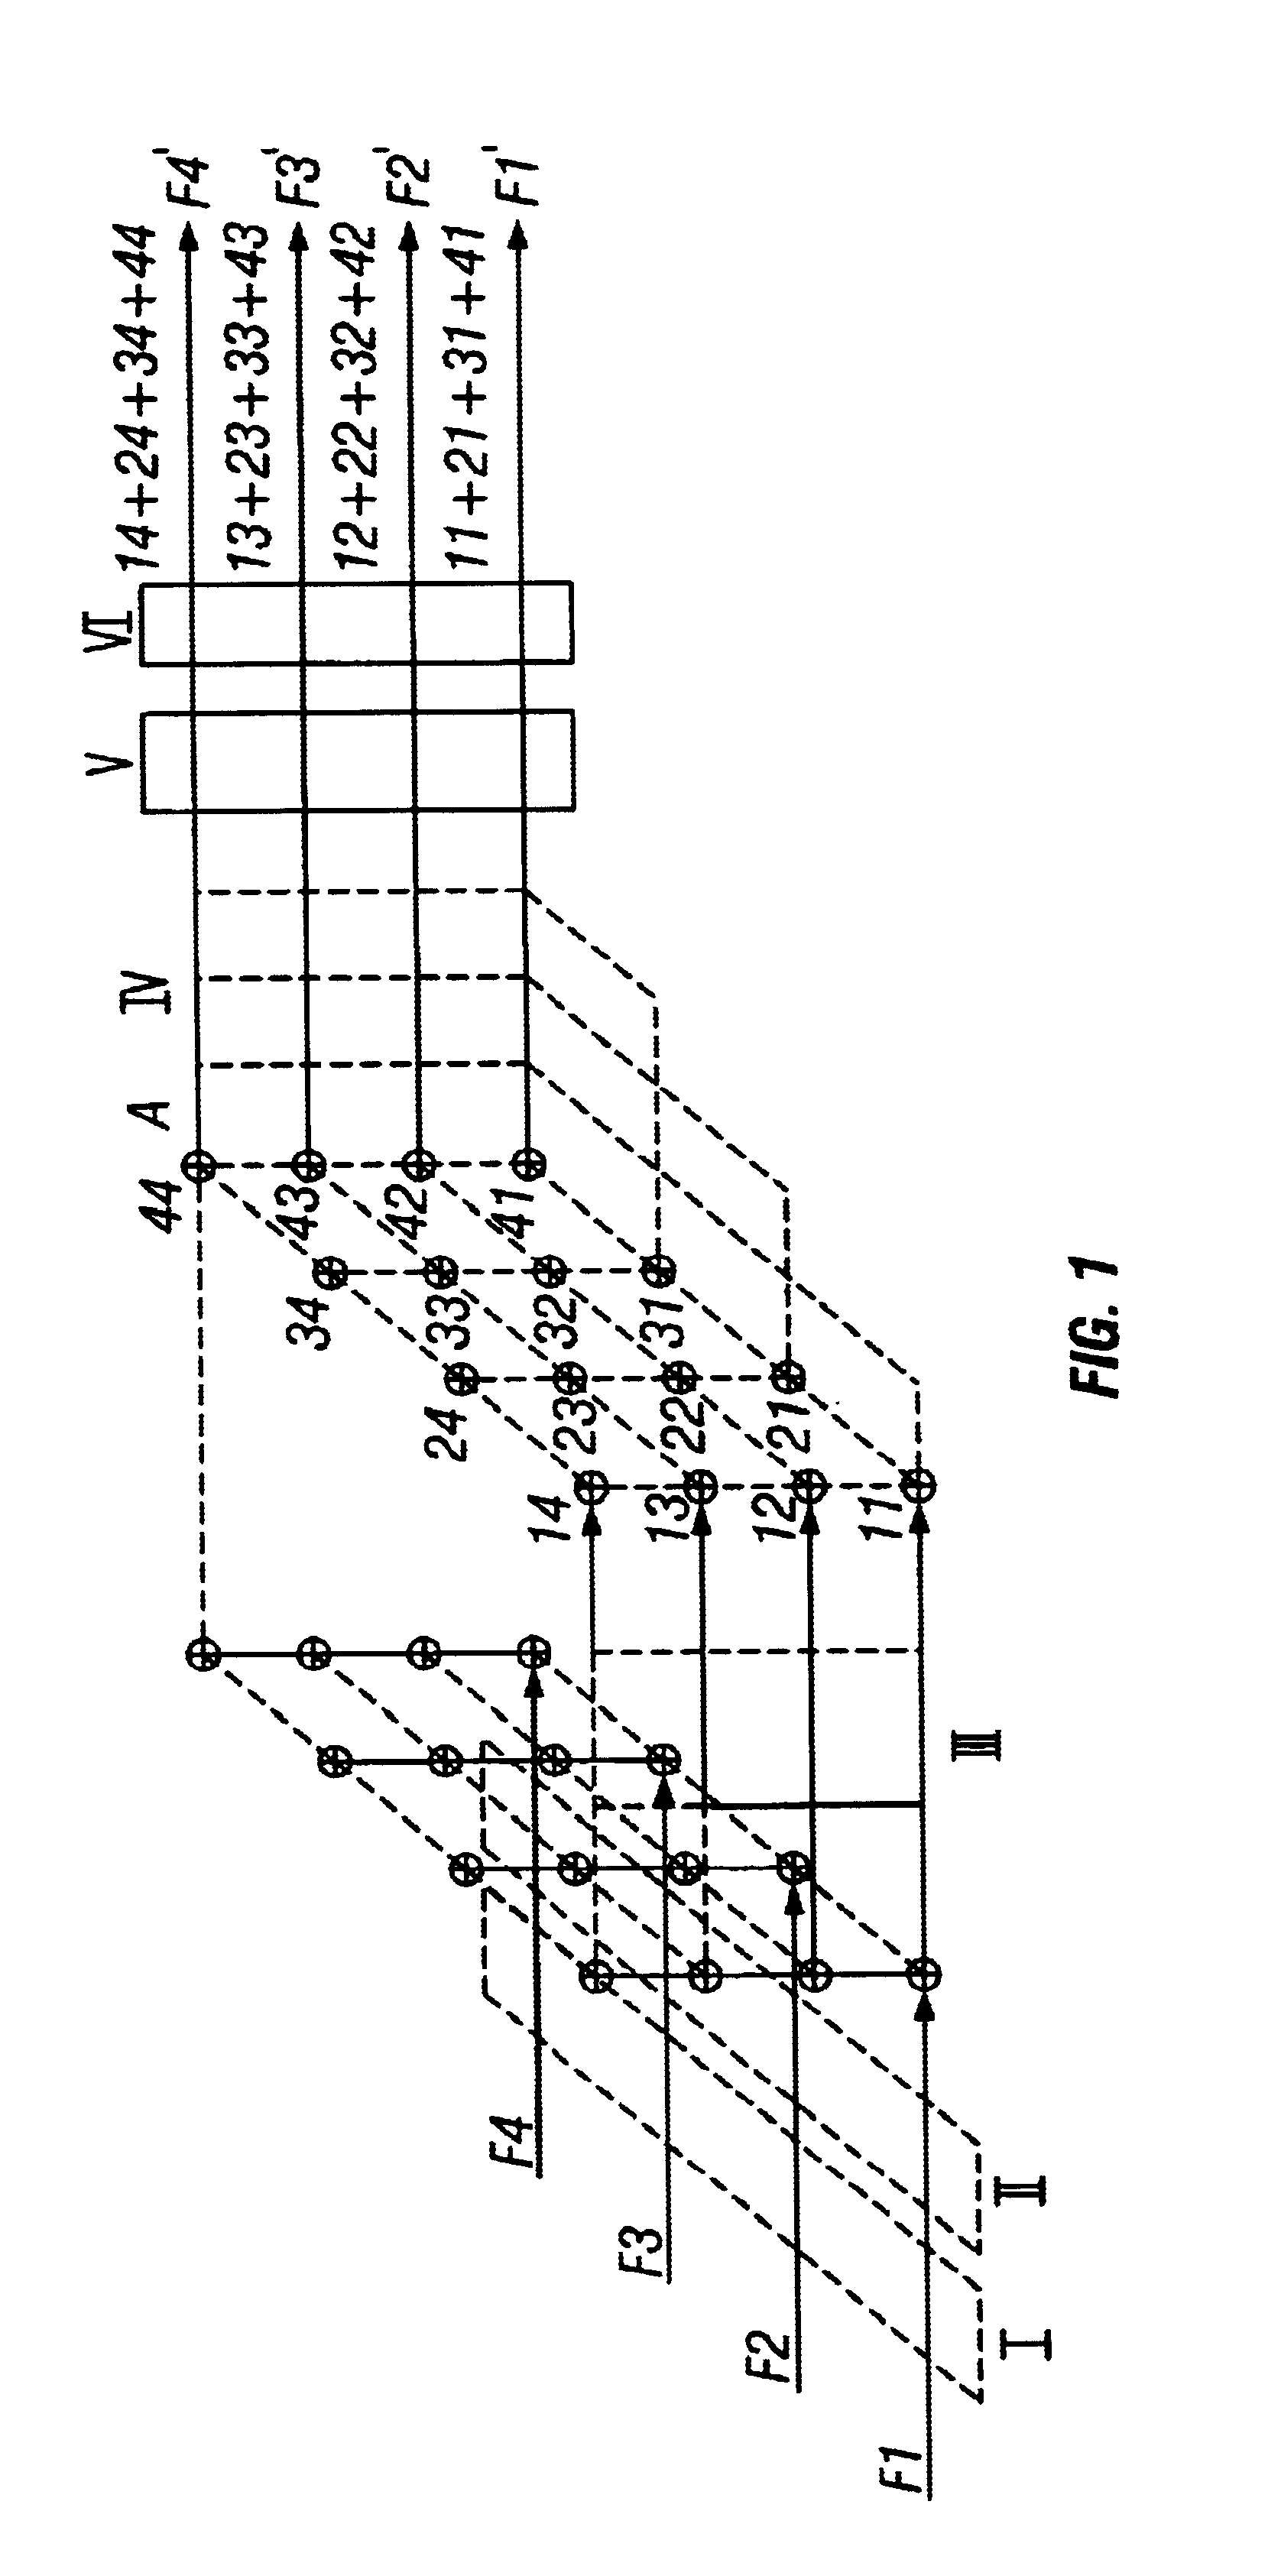 Routing optical matrix switching method and device